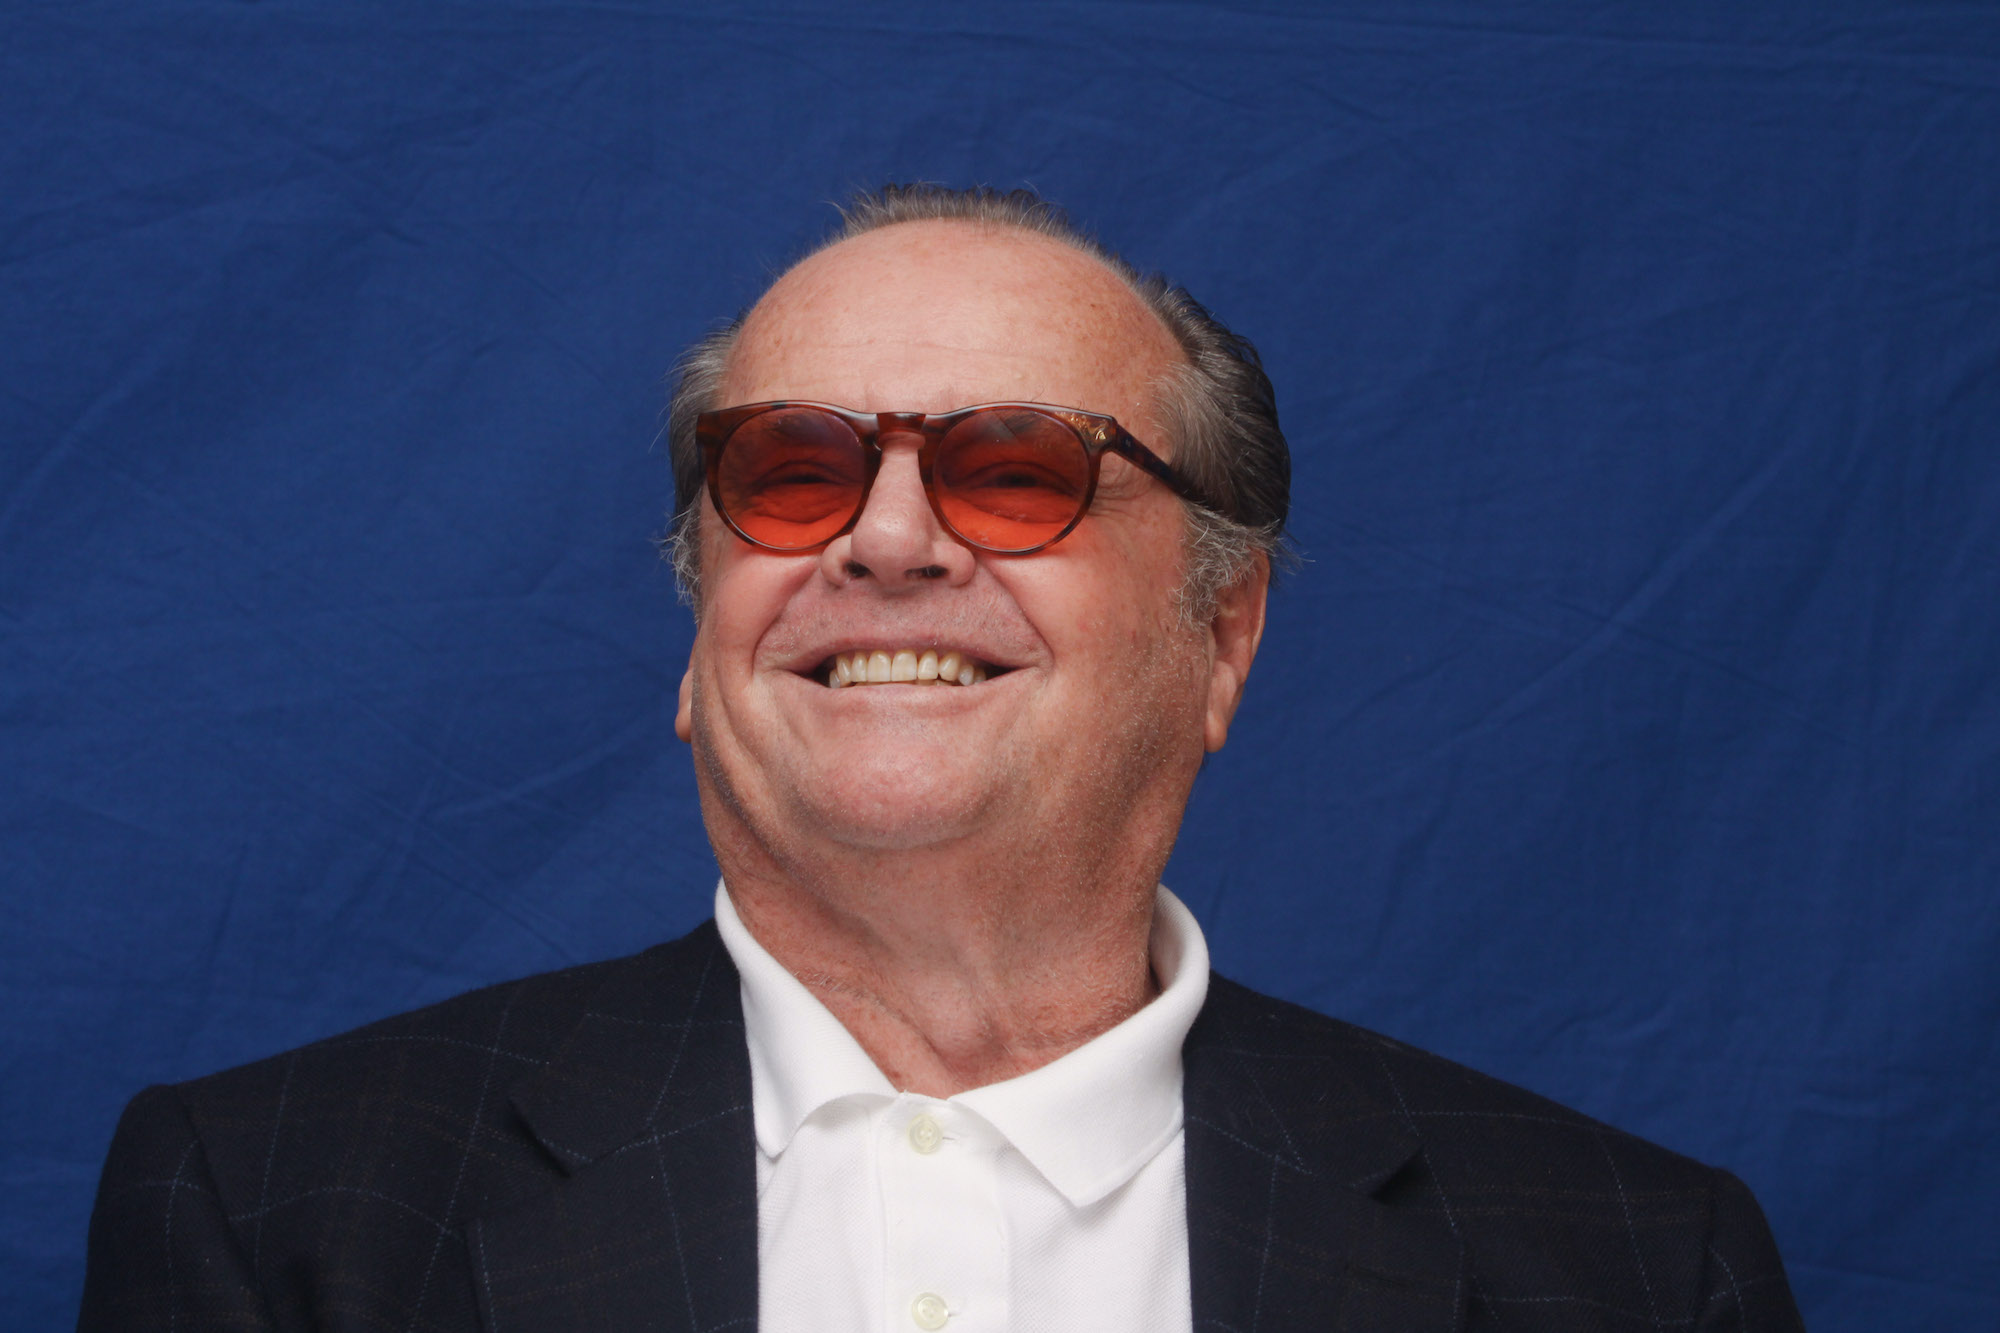 Jack Nicholson smiling in front of a blue backdrop, wearing sunglasses